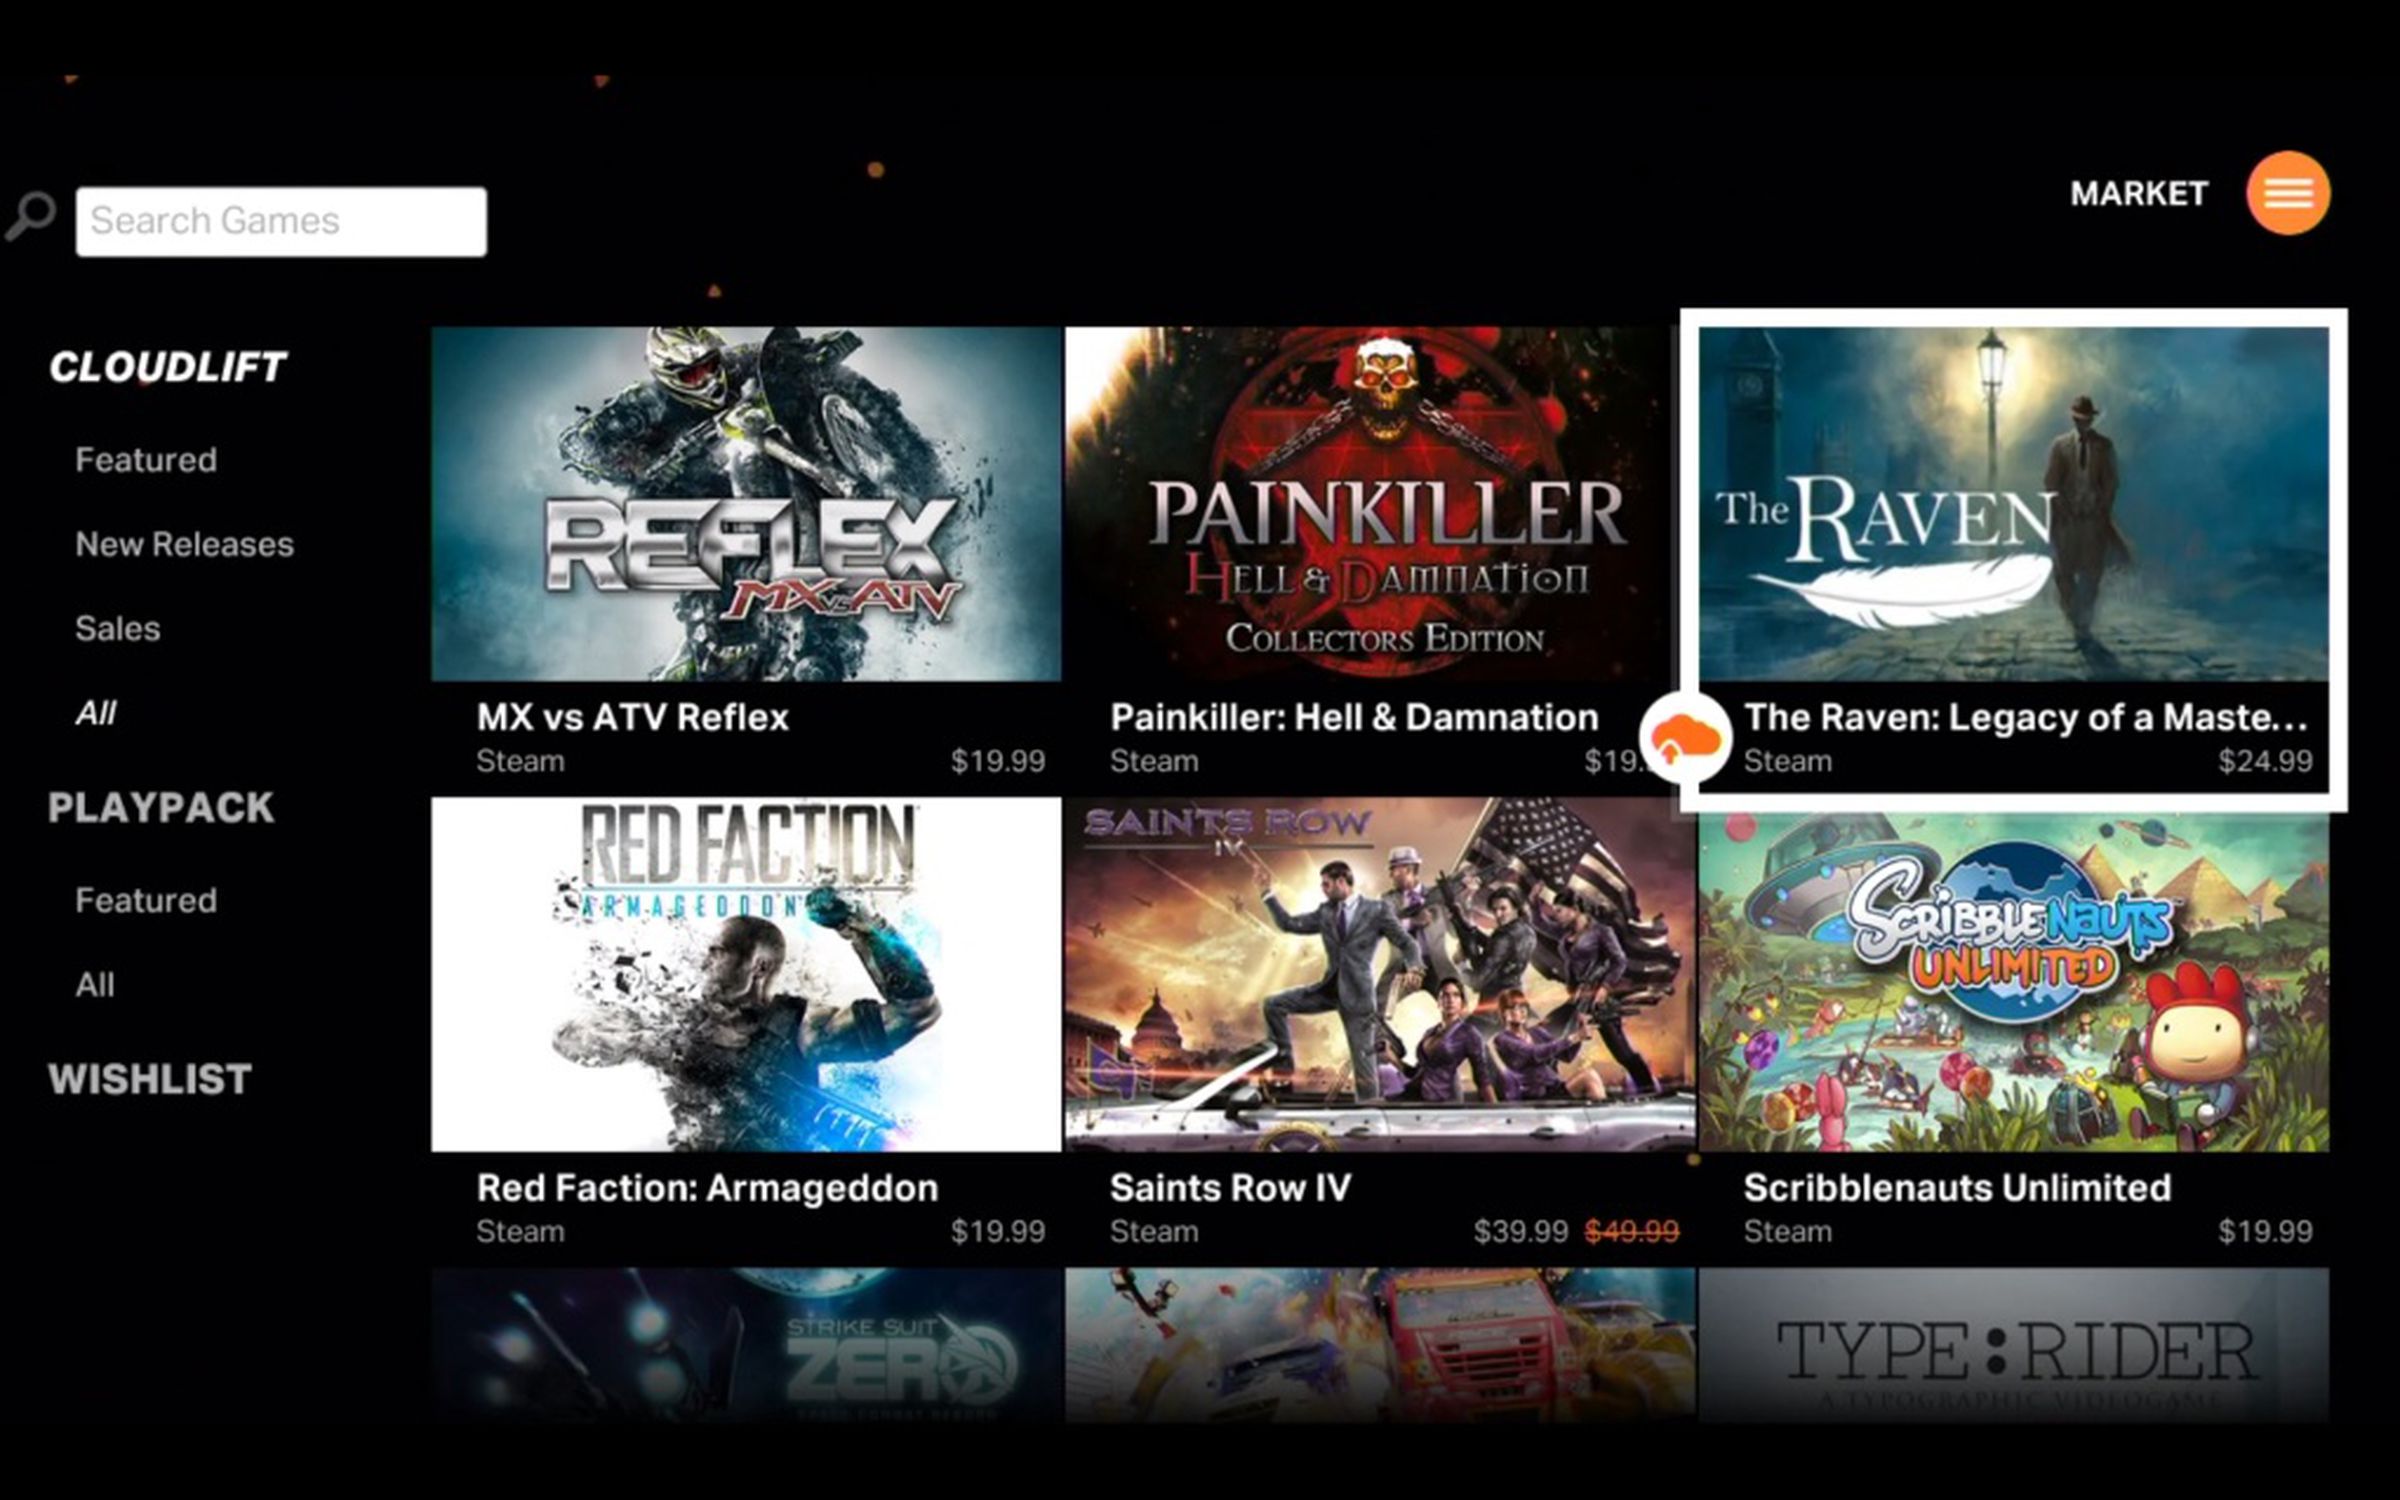 OnLive's new interface and Cloudlift-supported games